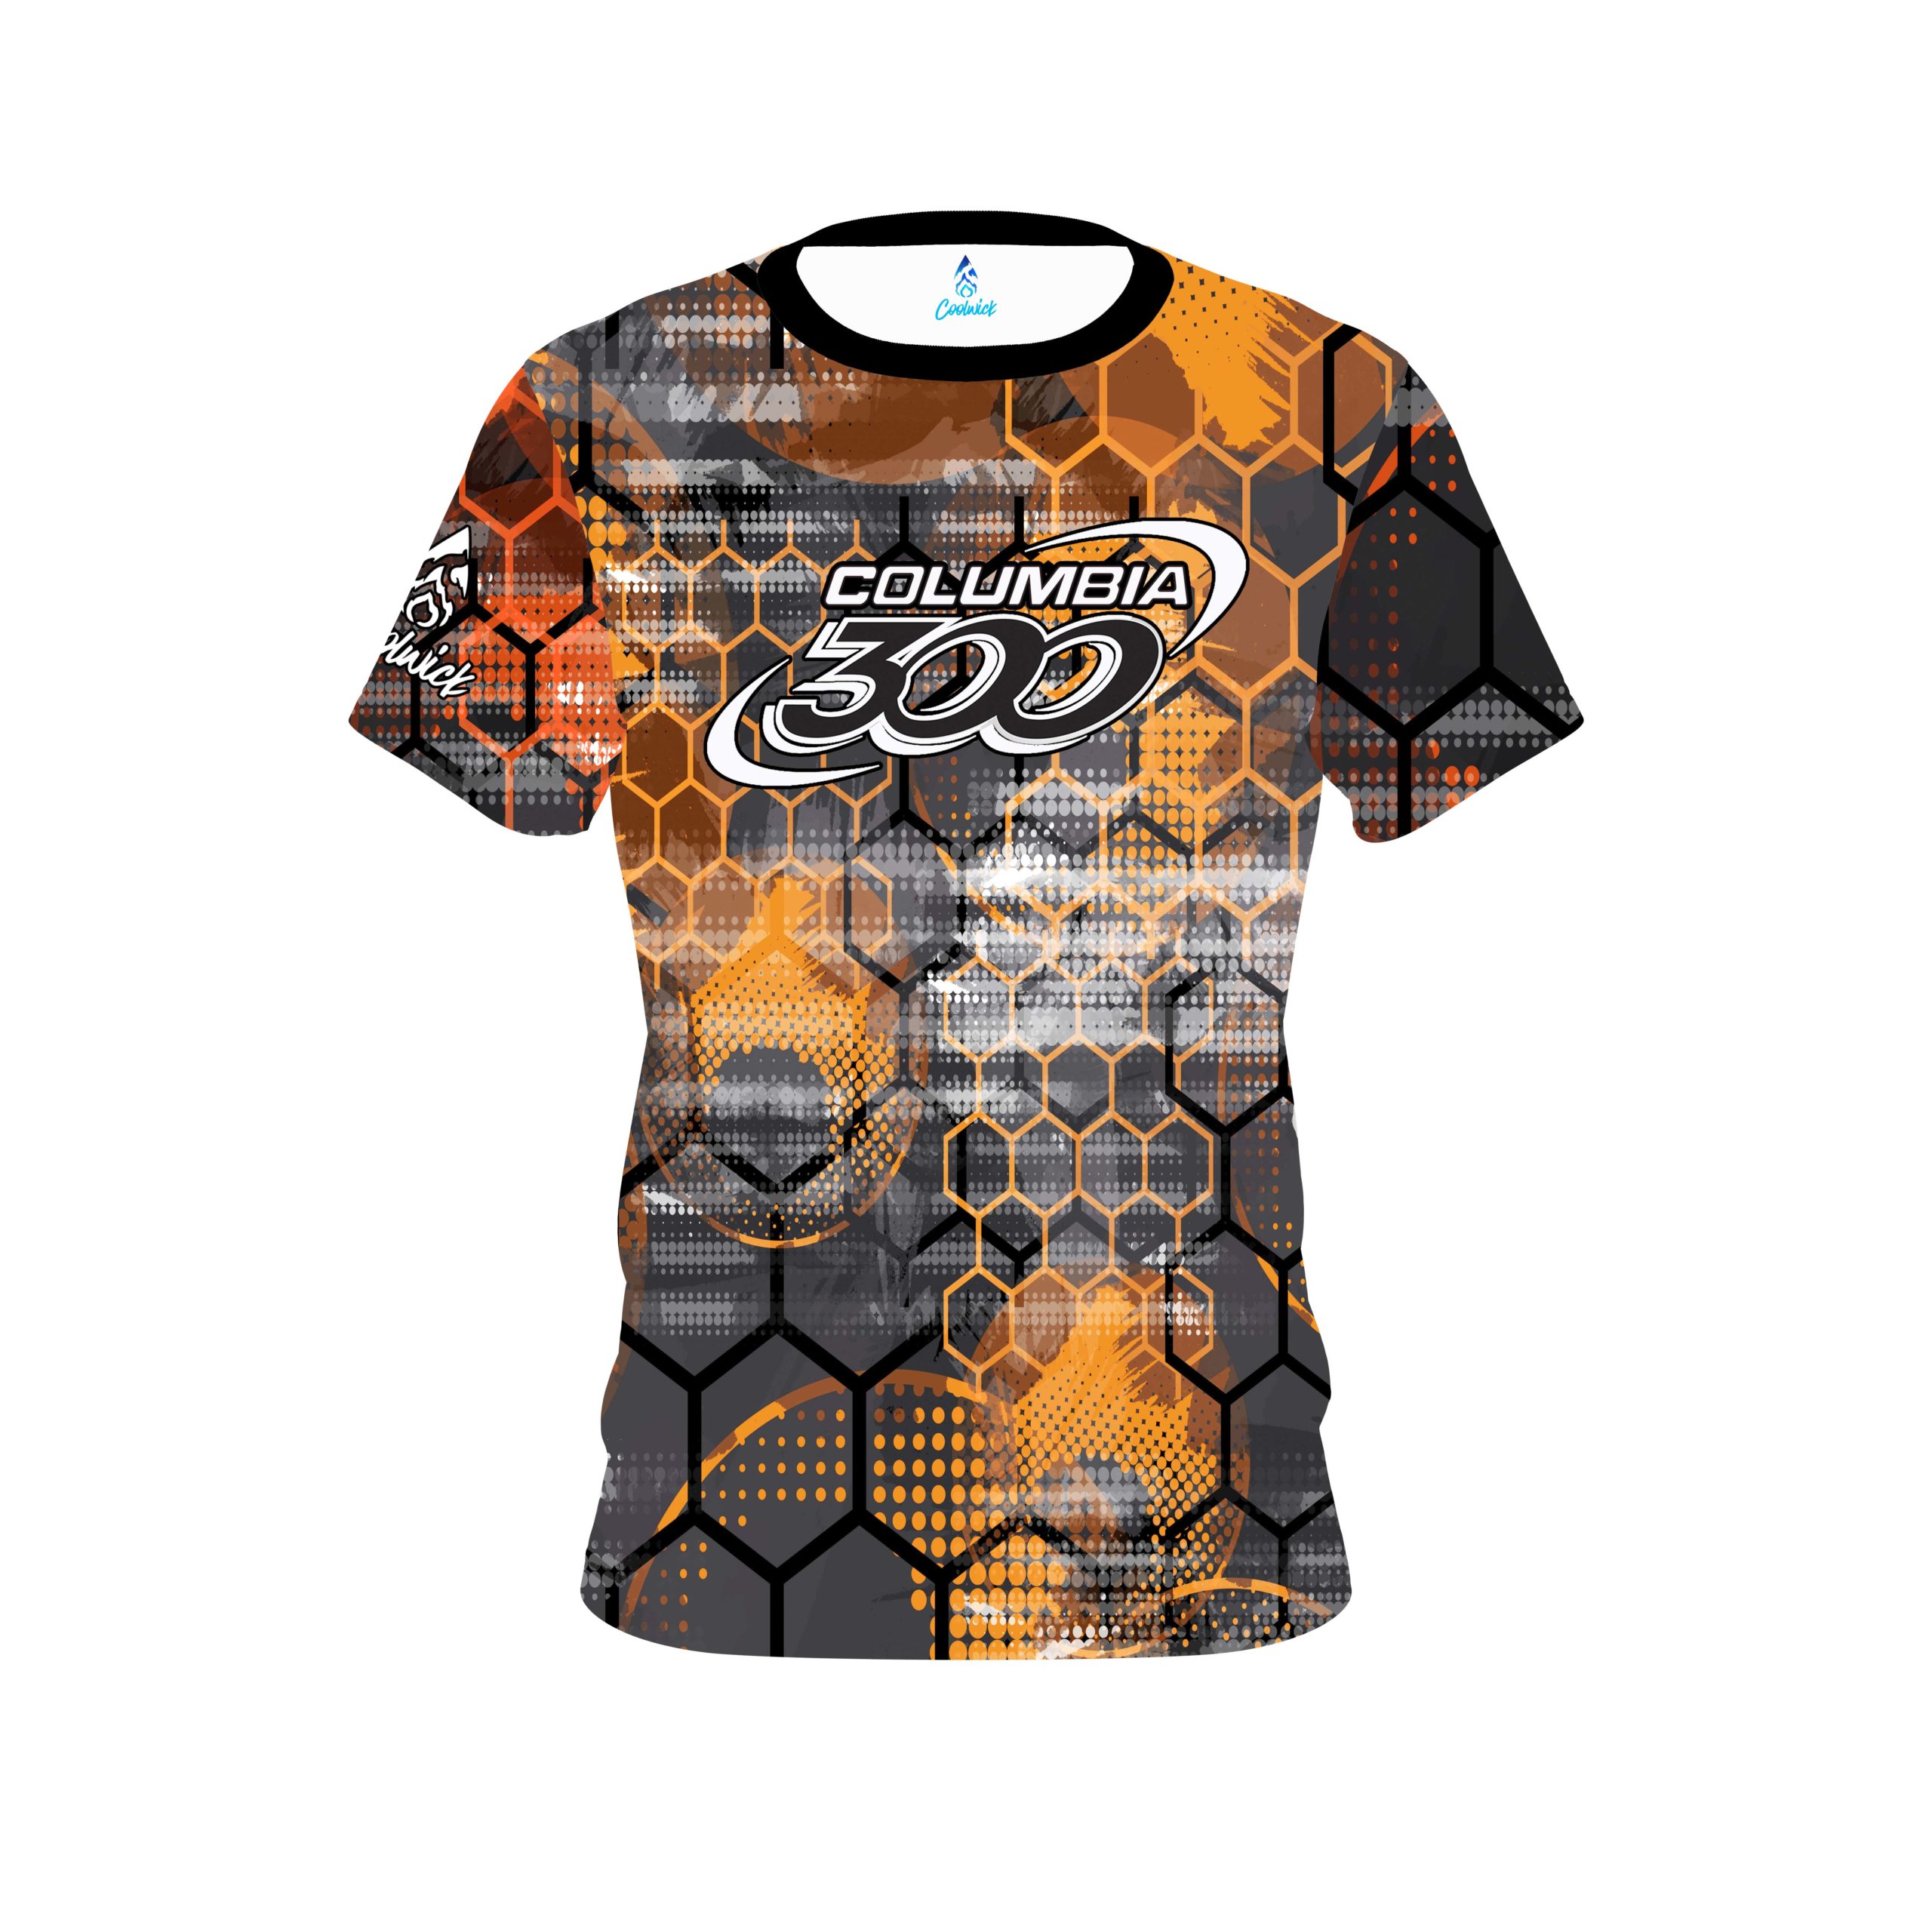 Columbia 300 Fire Honeycomb CoolWick Bowling Jersey